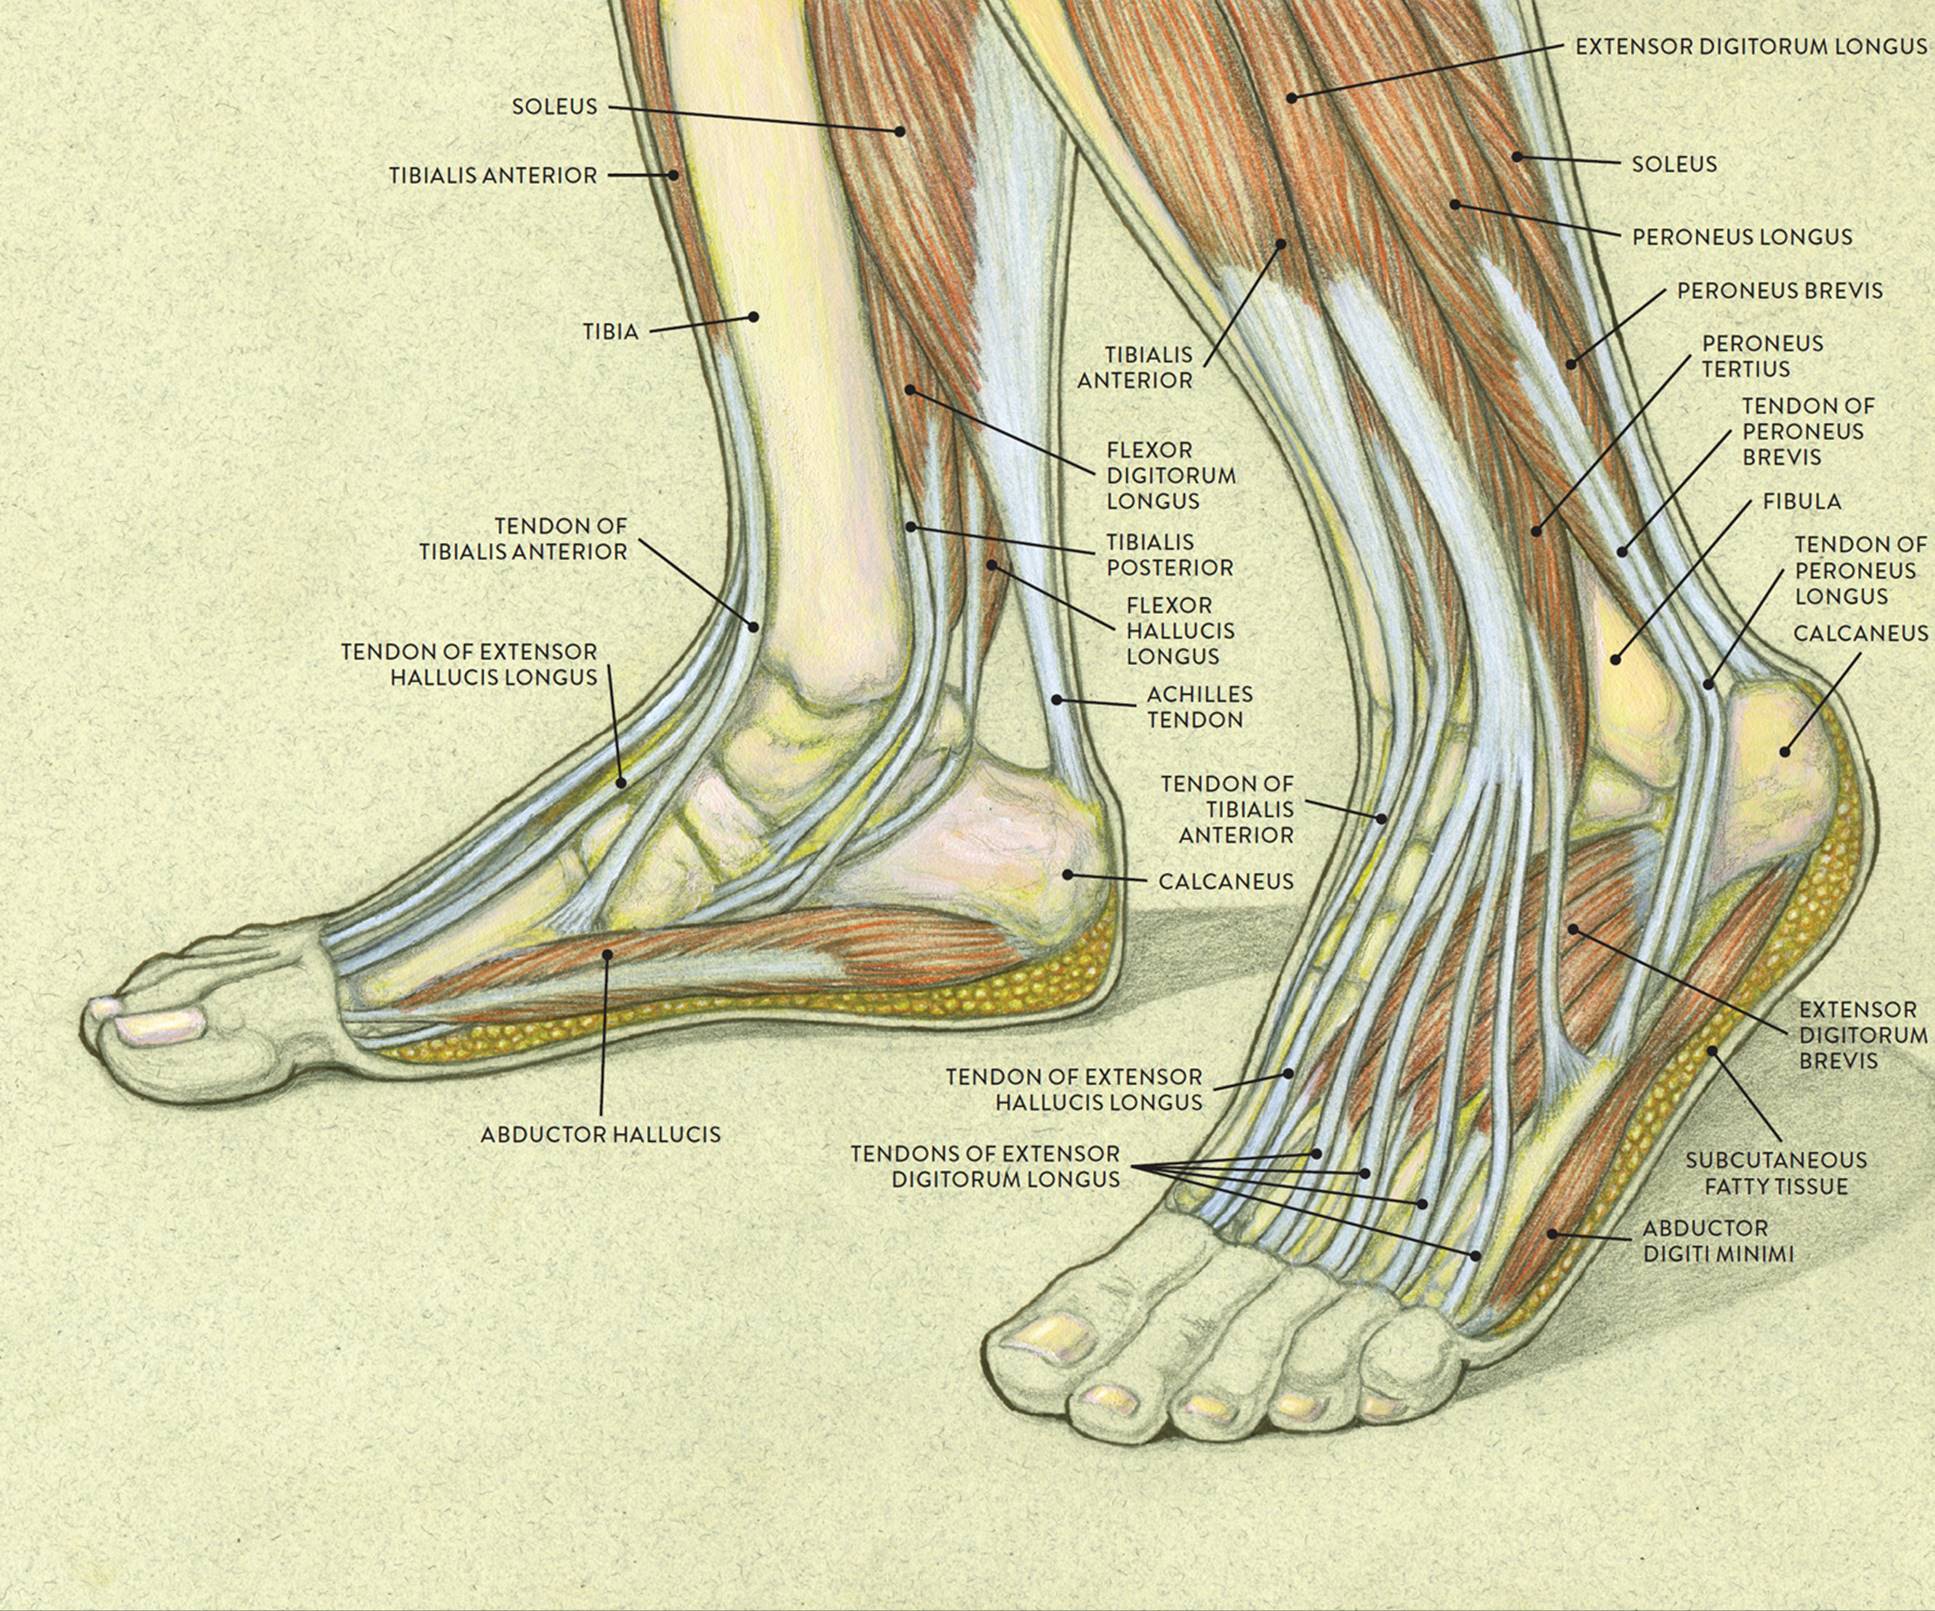 Muscles of the Leg and Foot - Classic Human Anatomy in Motion: The